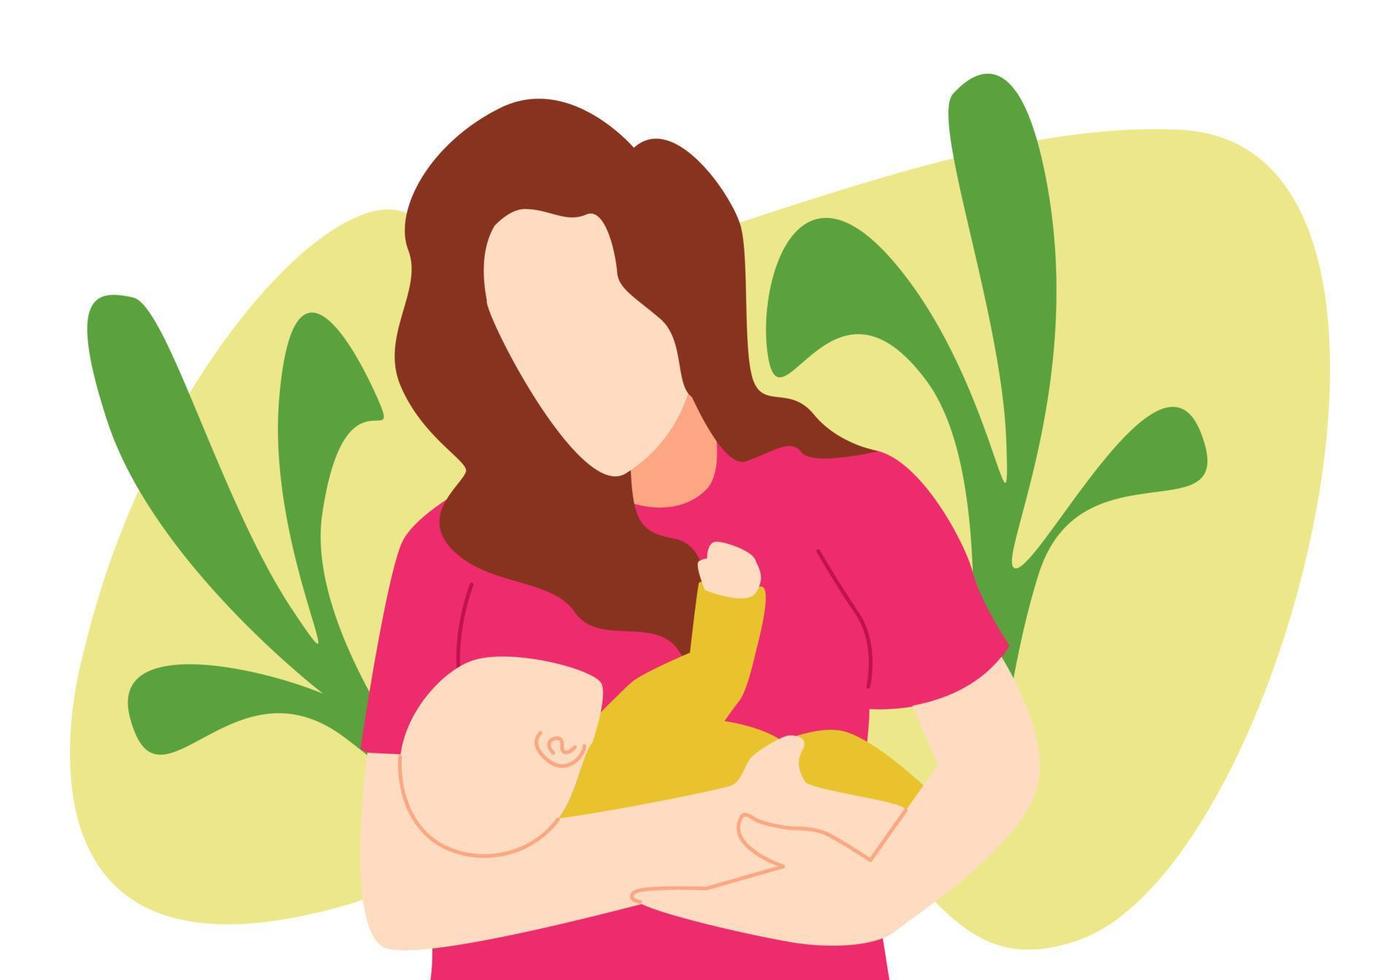 a mother takes care of her baby. parents holding baby. wavy curly hair woman. concept of family, children, raising. vector flat style illustration.